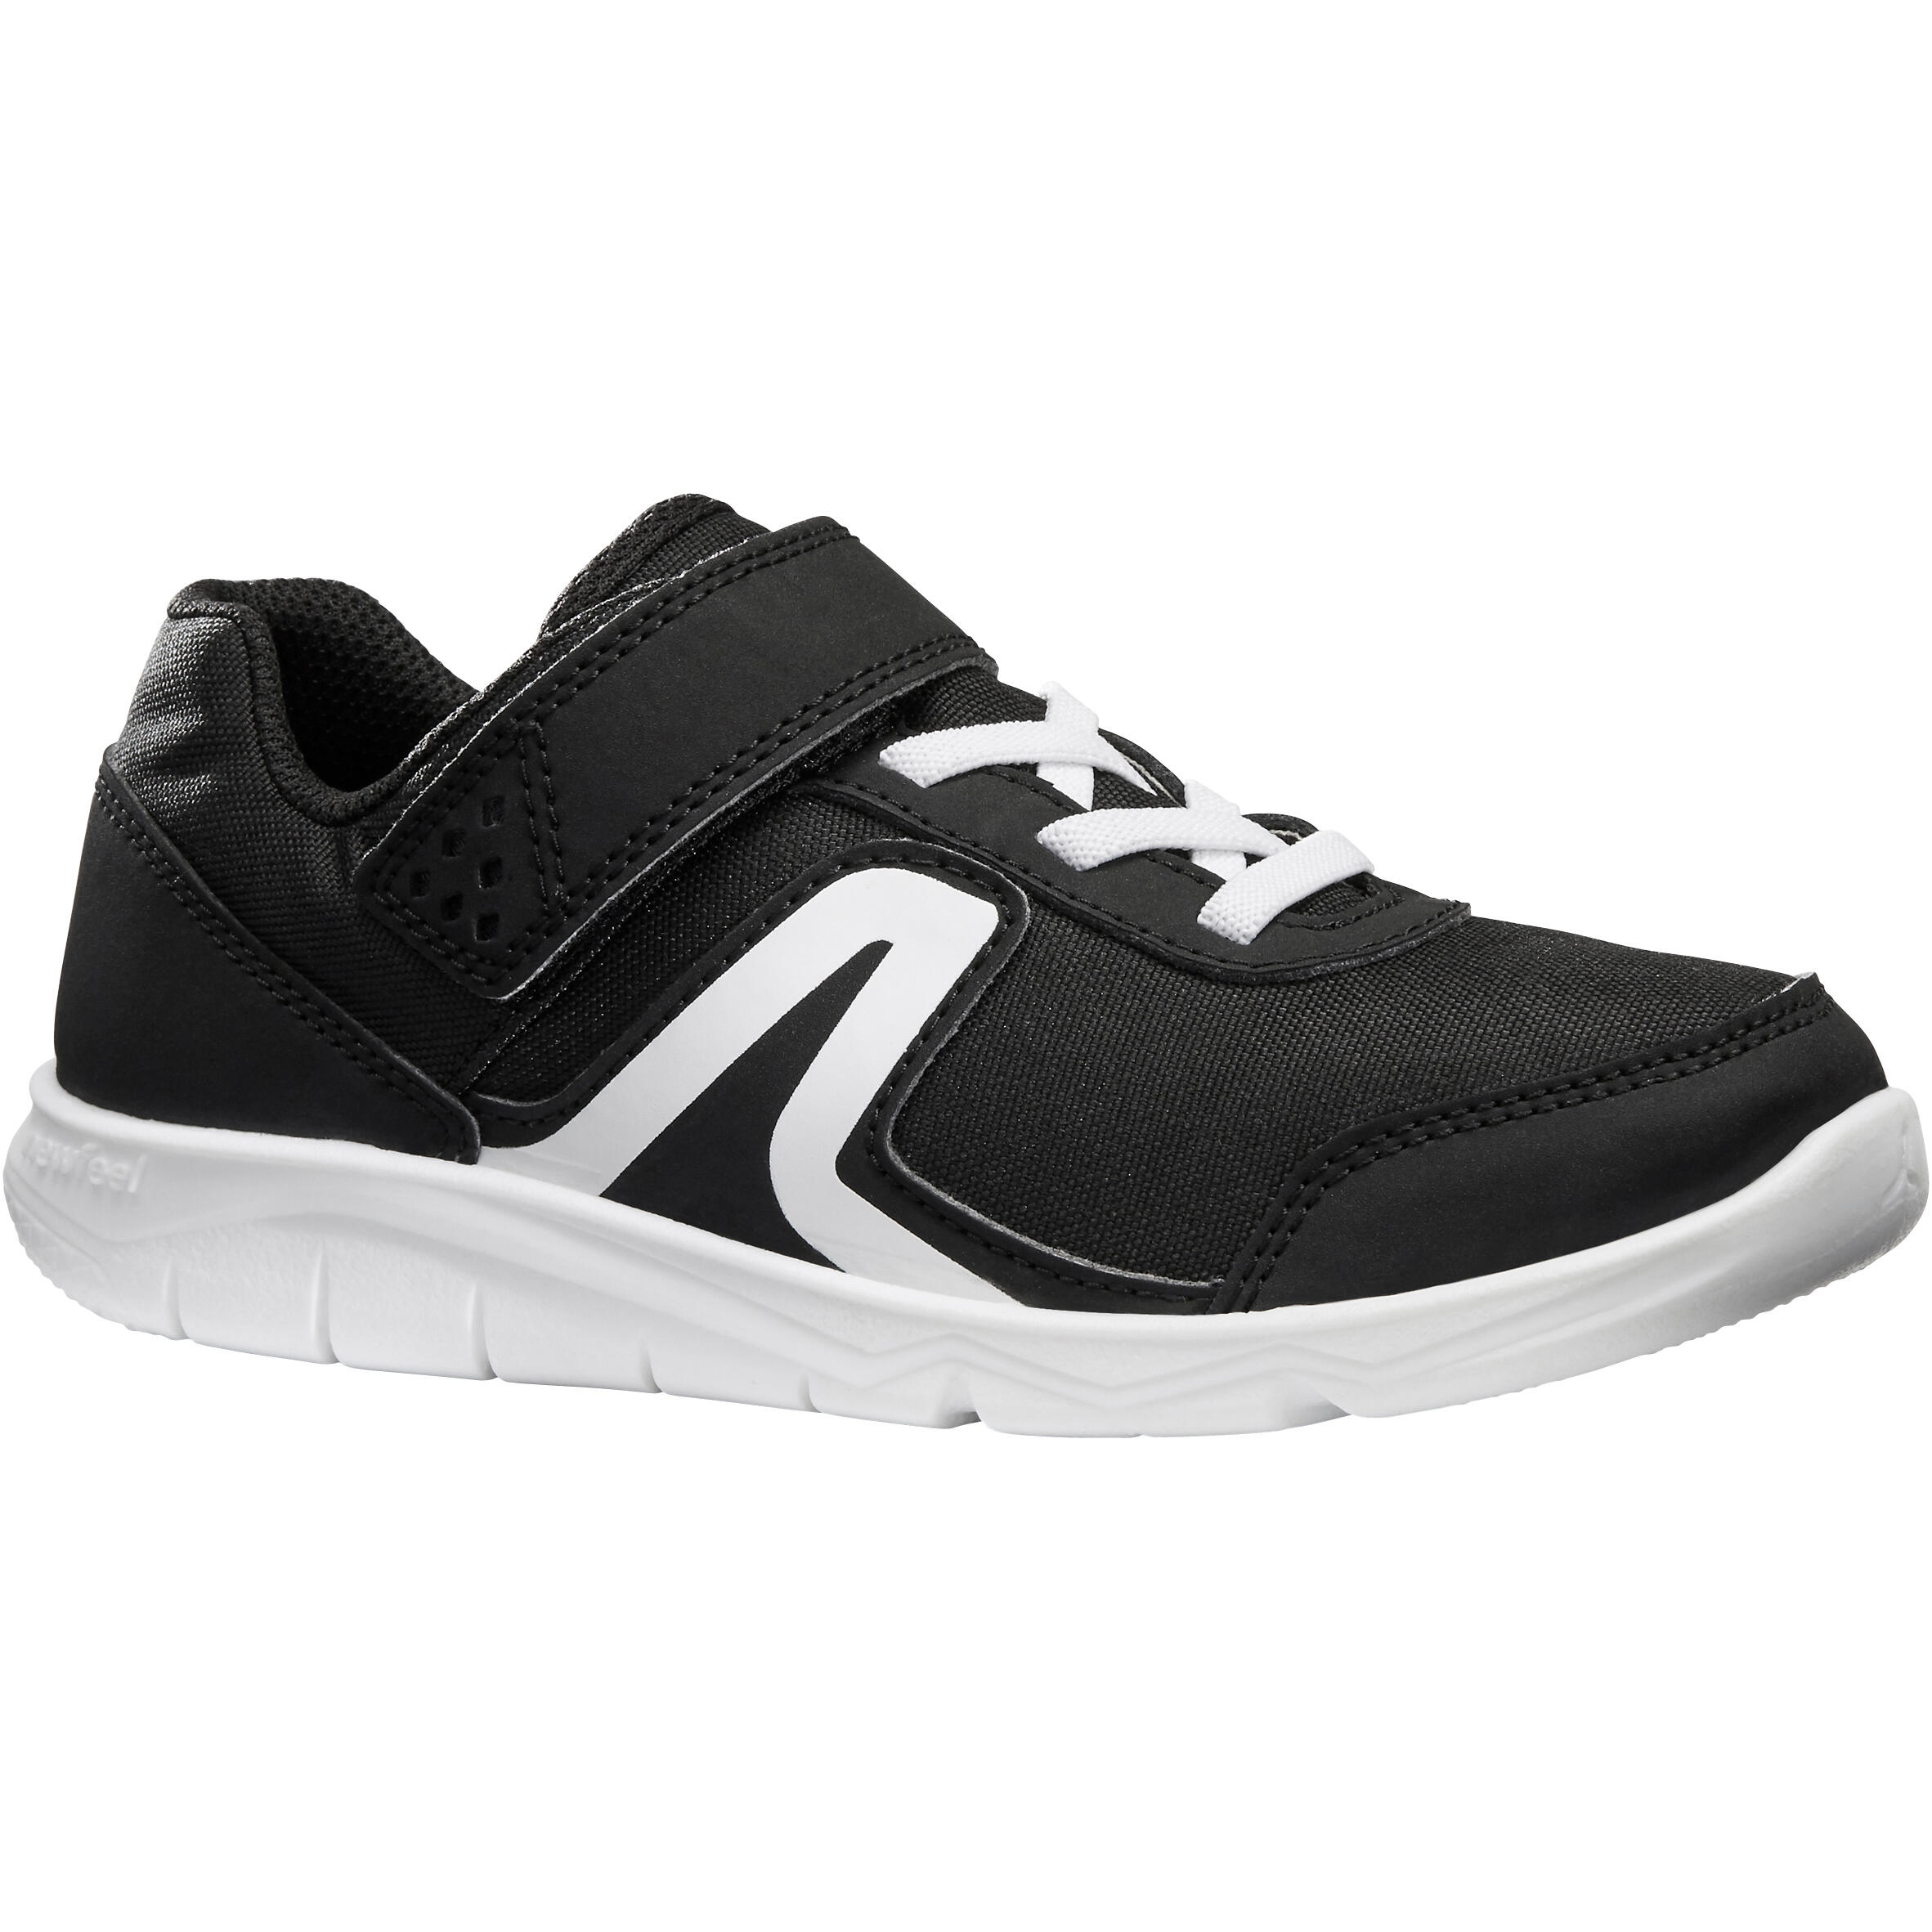 decathlon shoes for kids